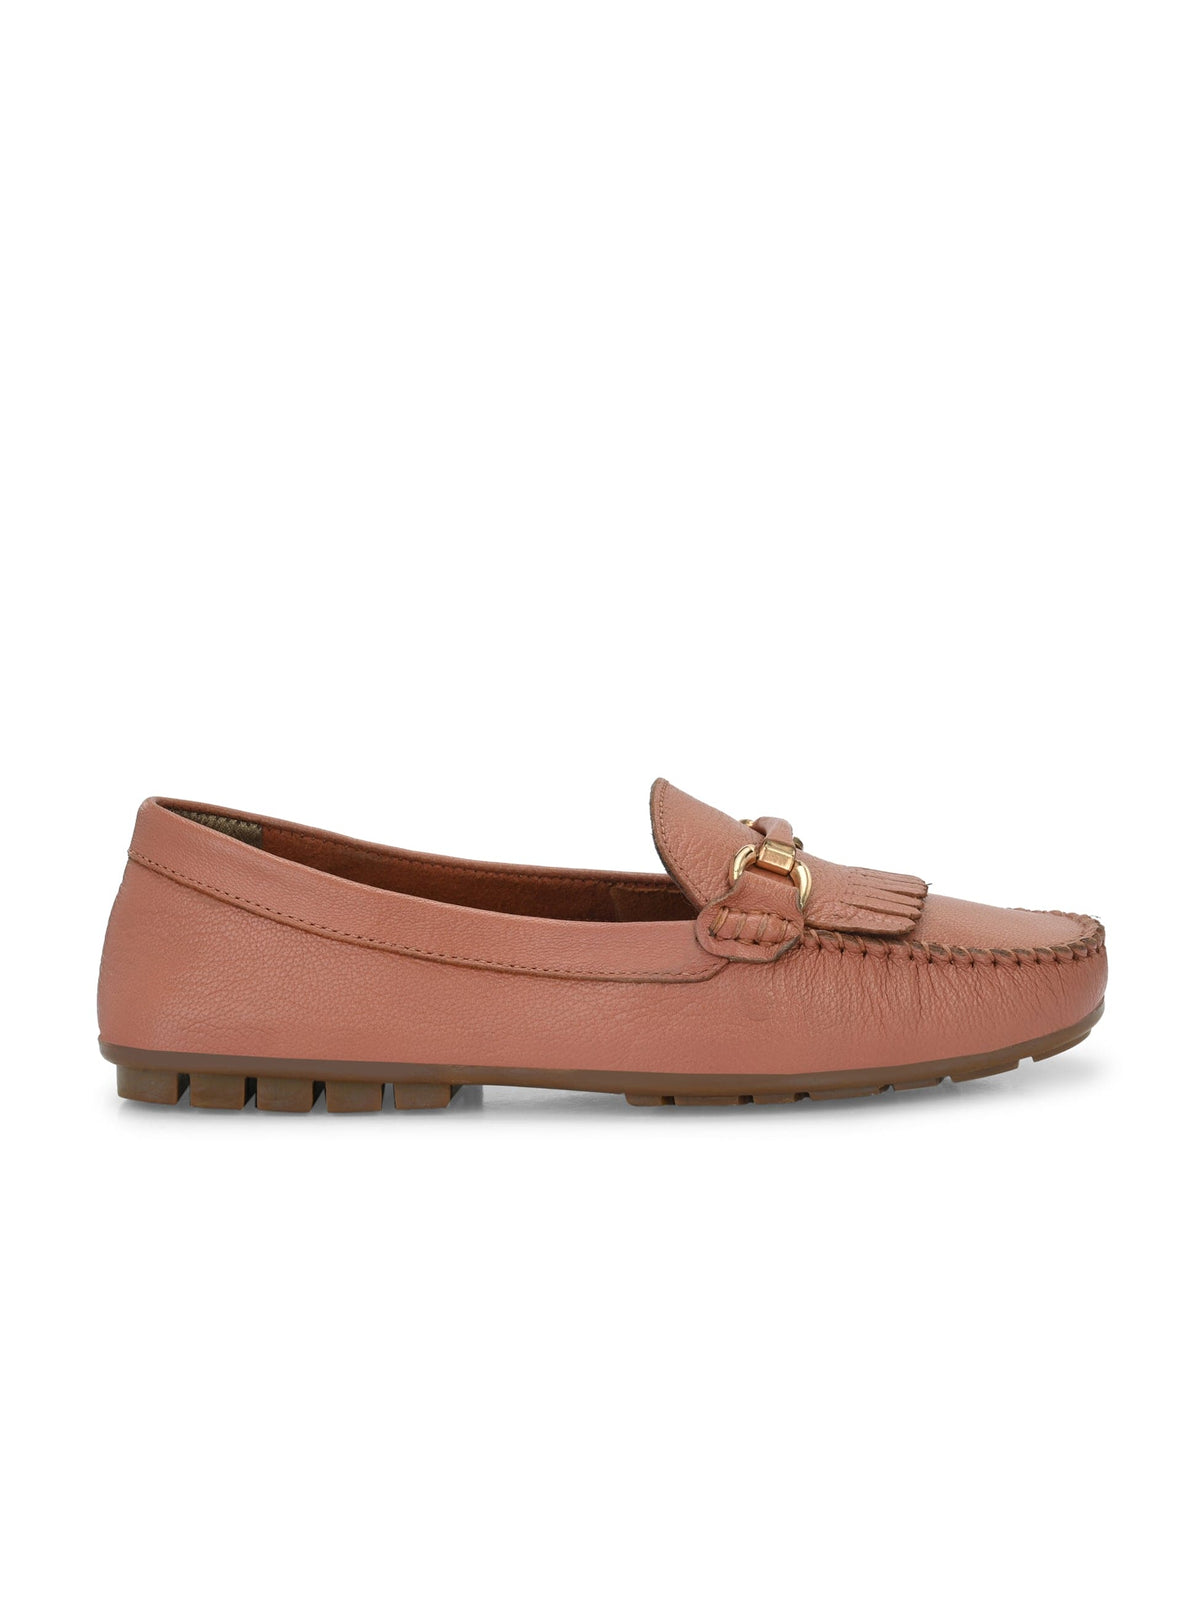 Stylish Buckled Loafers For Women egoss-shoes